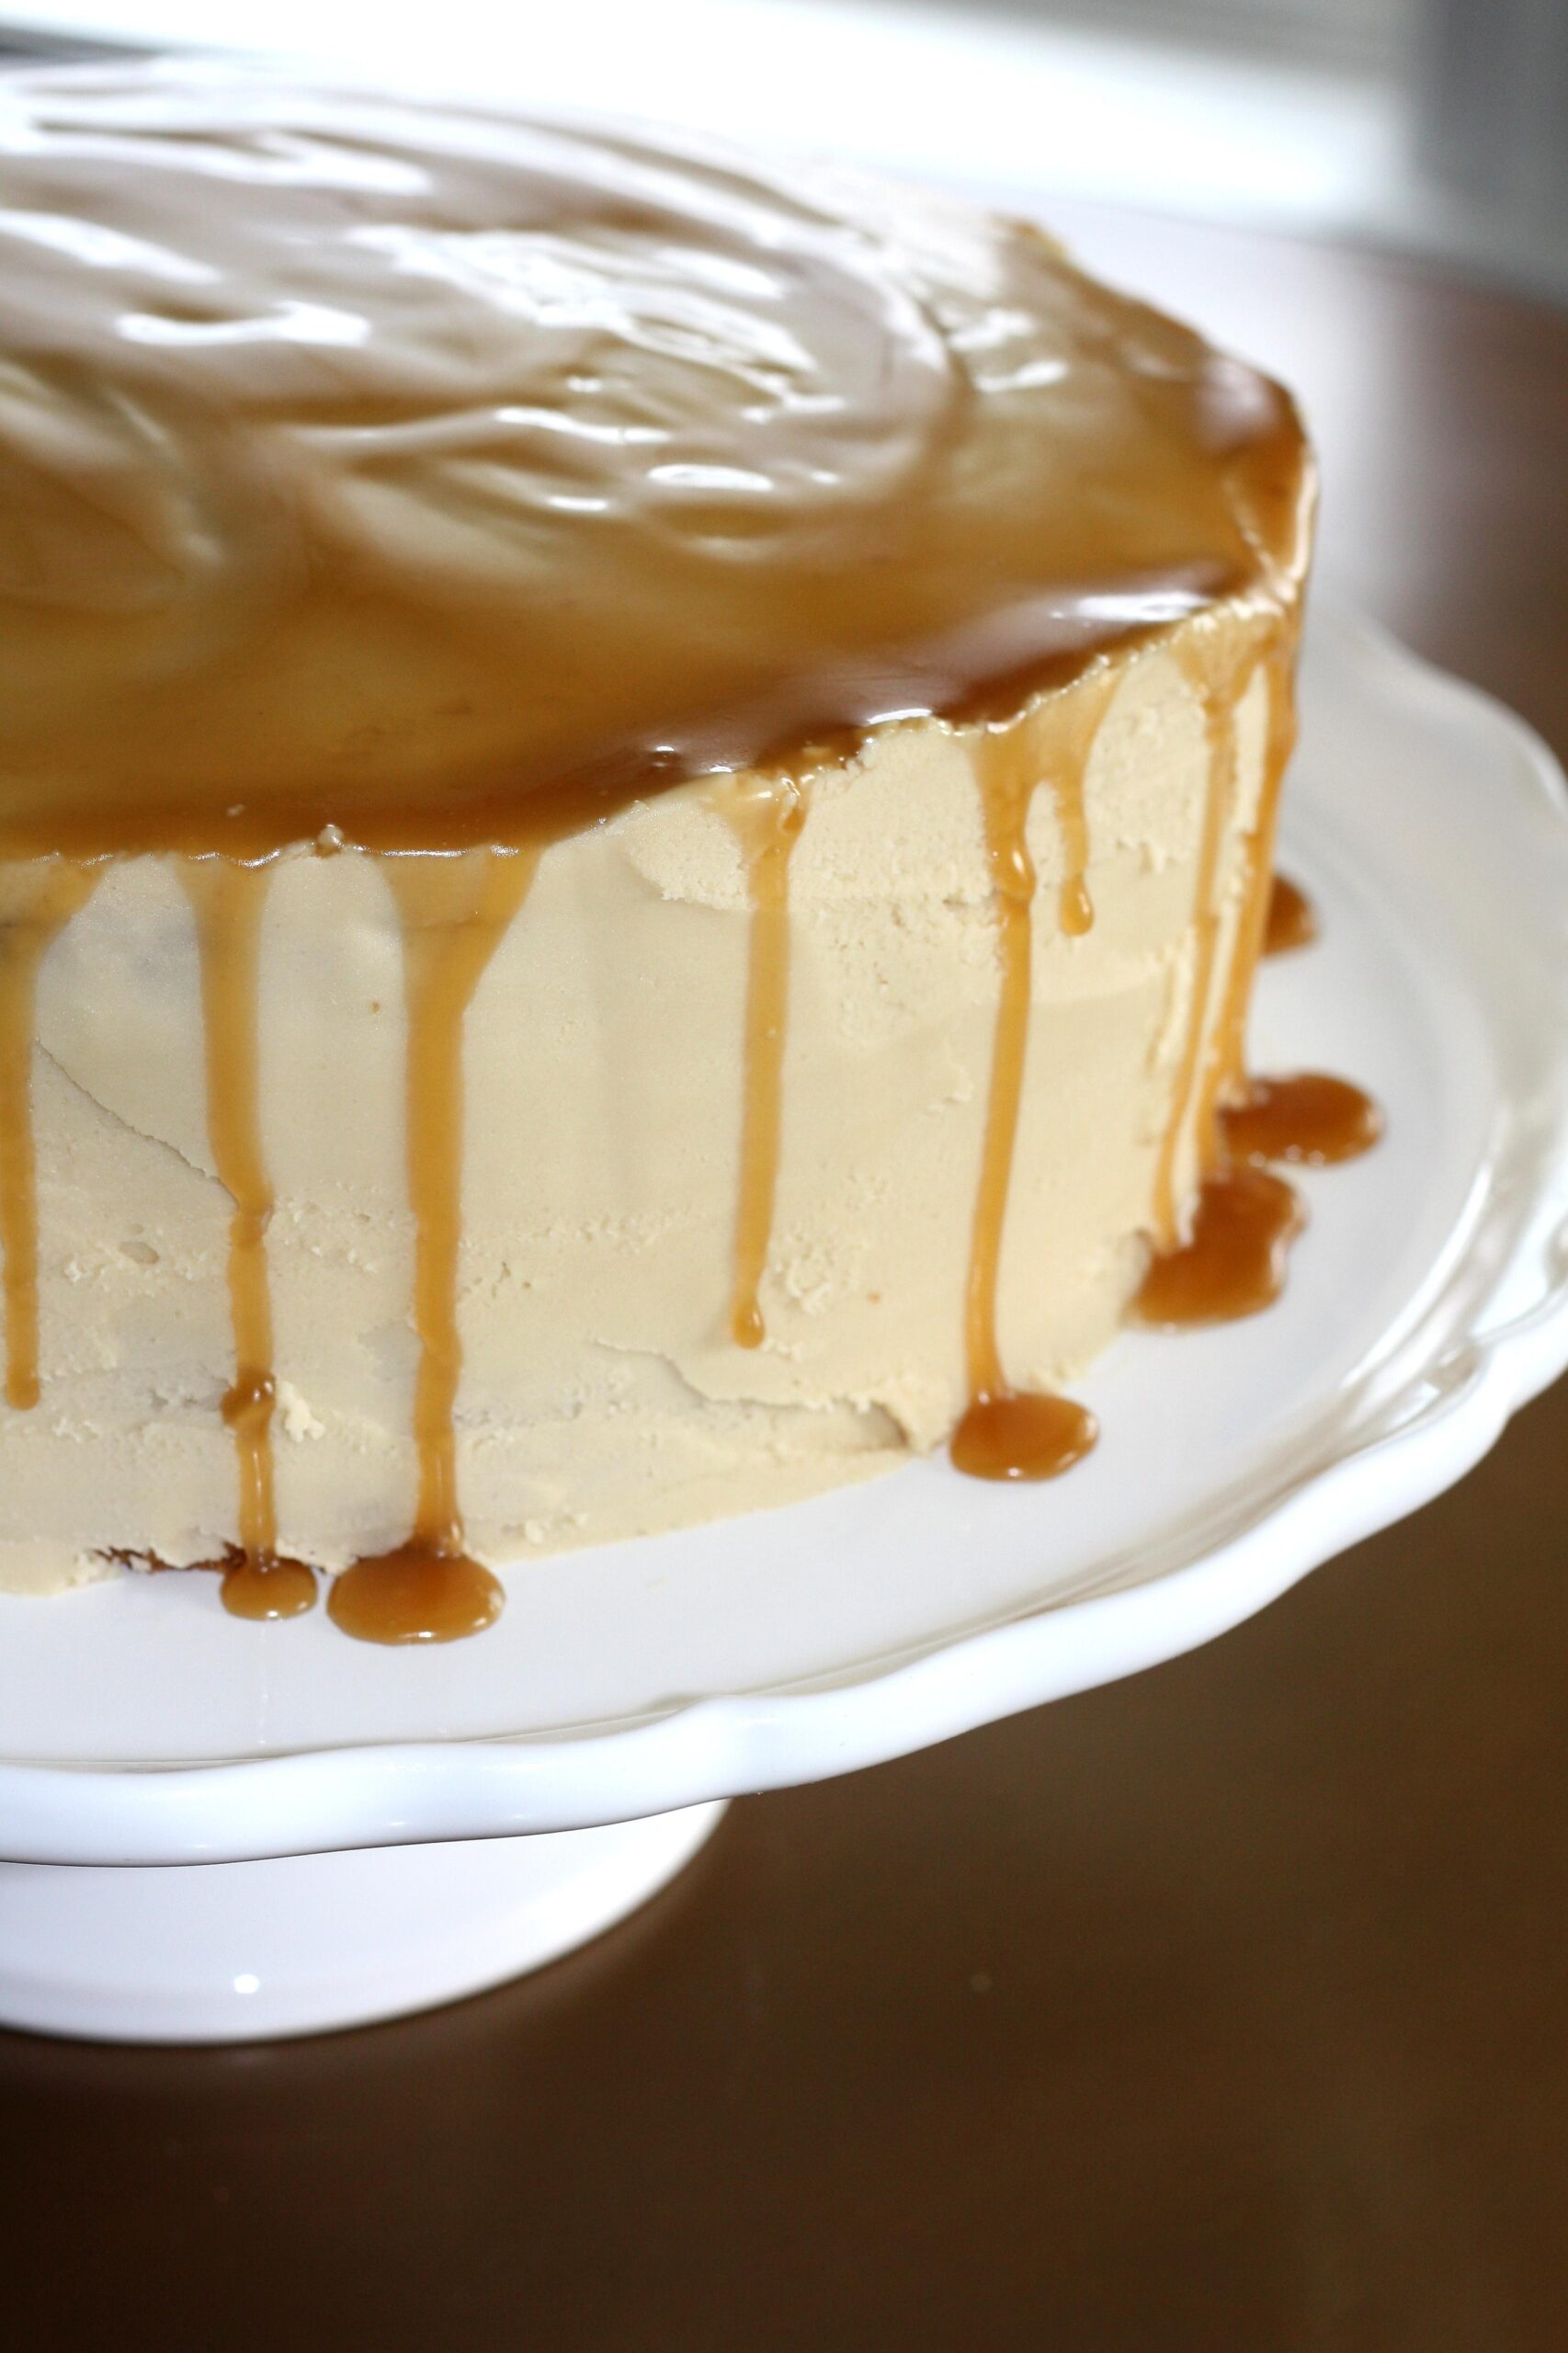  Enjoy a warm and indulgent slice of Caramel Latte Cake with a hot cup of coffee